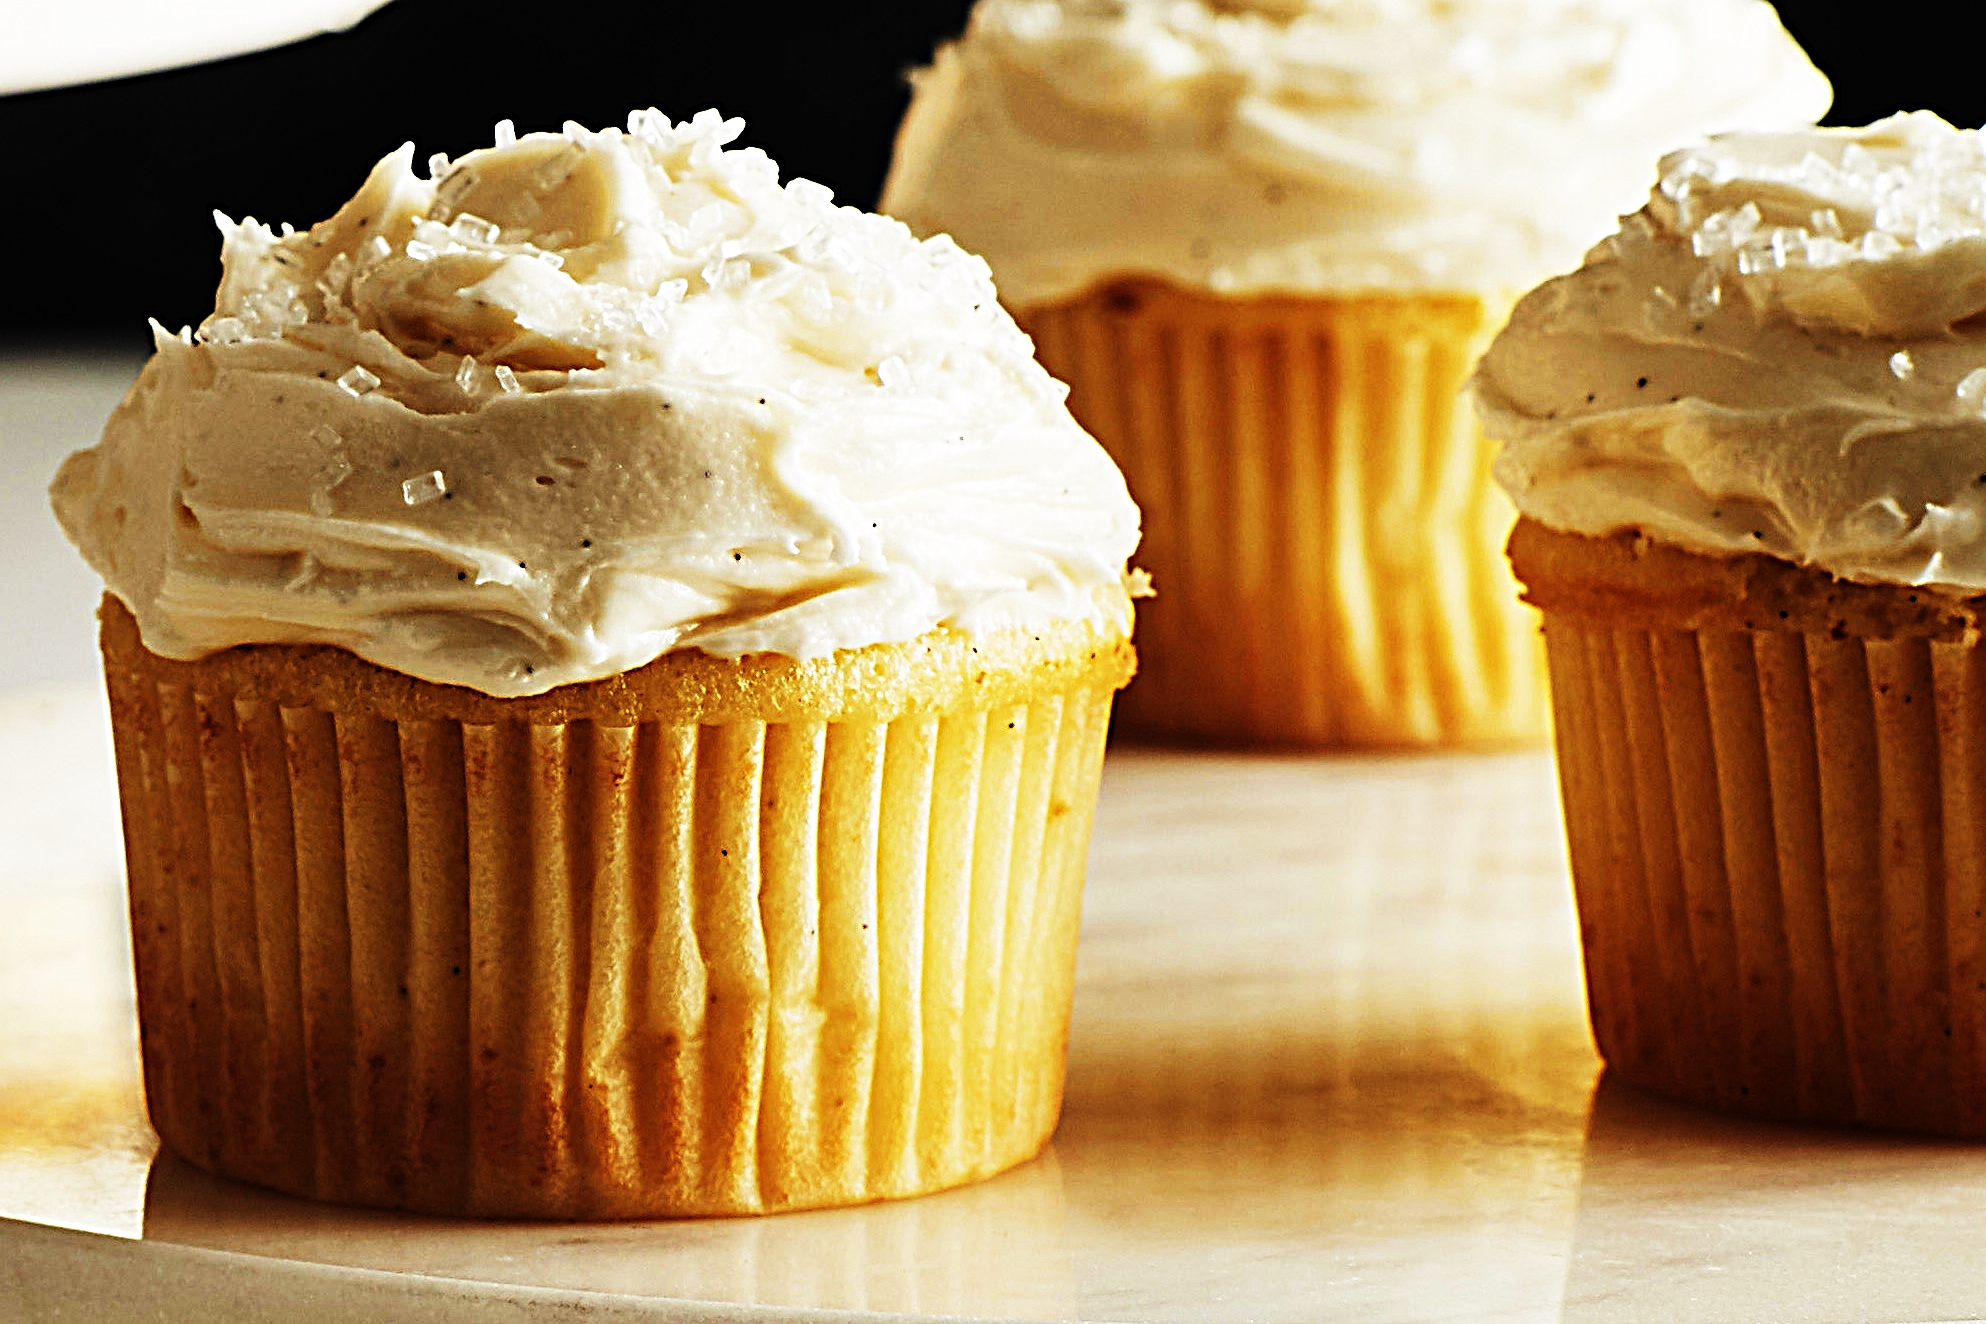 Stupid-Easy Recipe for Mascarpone Buttercream Frosting (#1 Top-Rated)